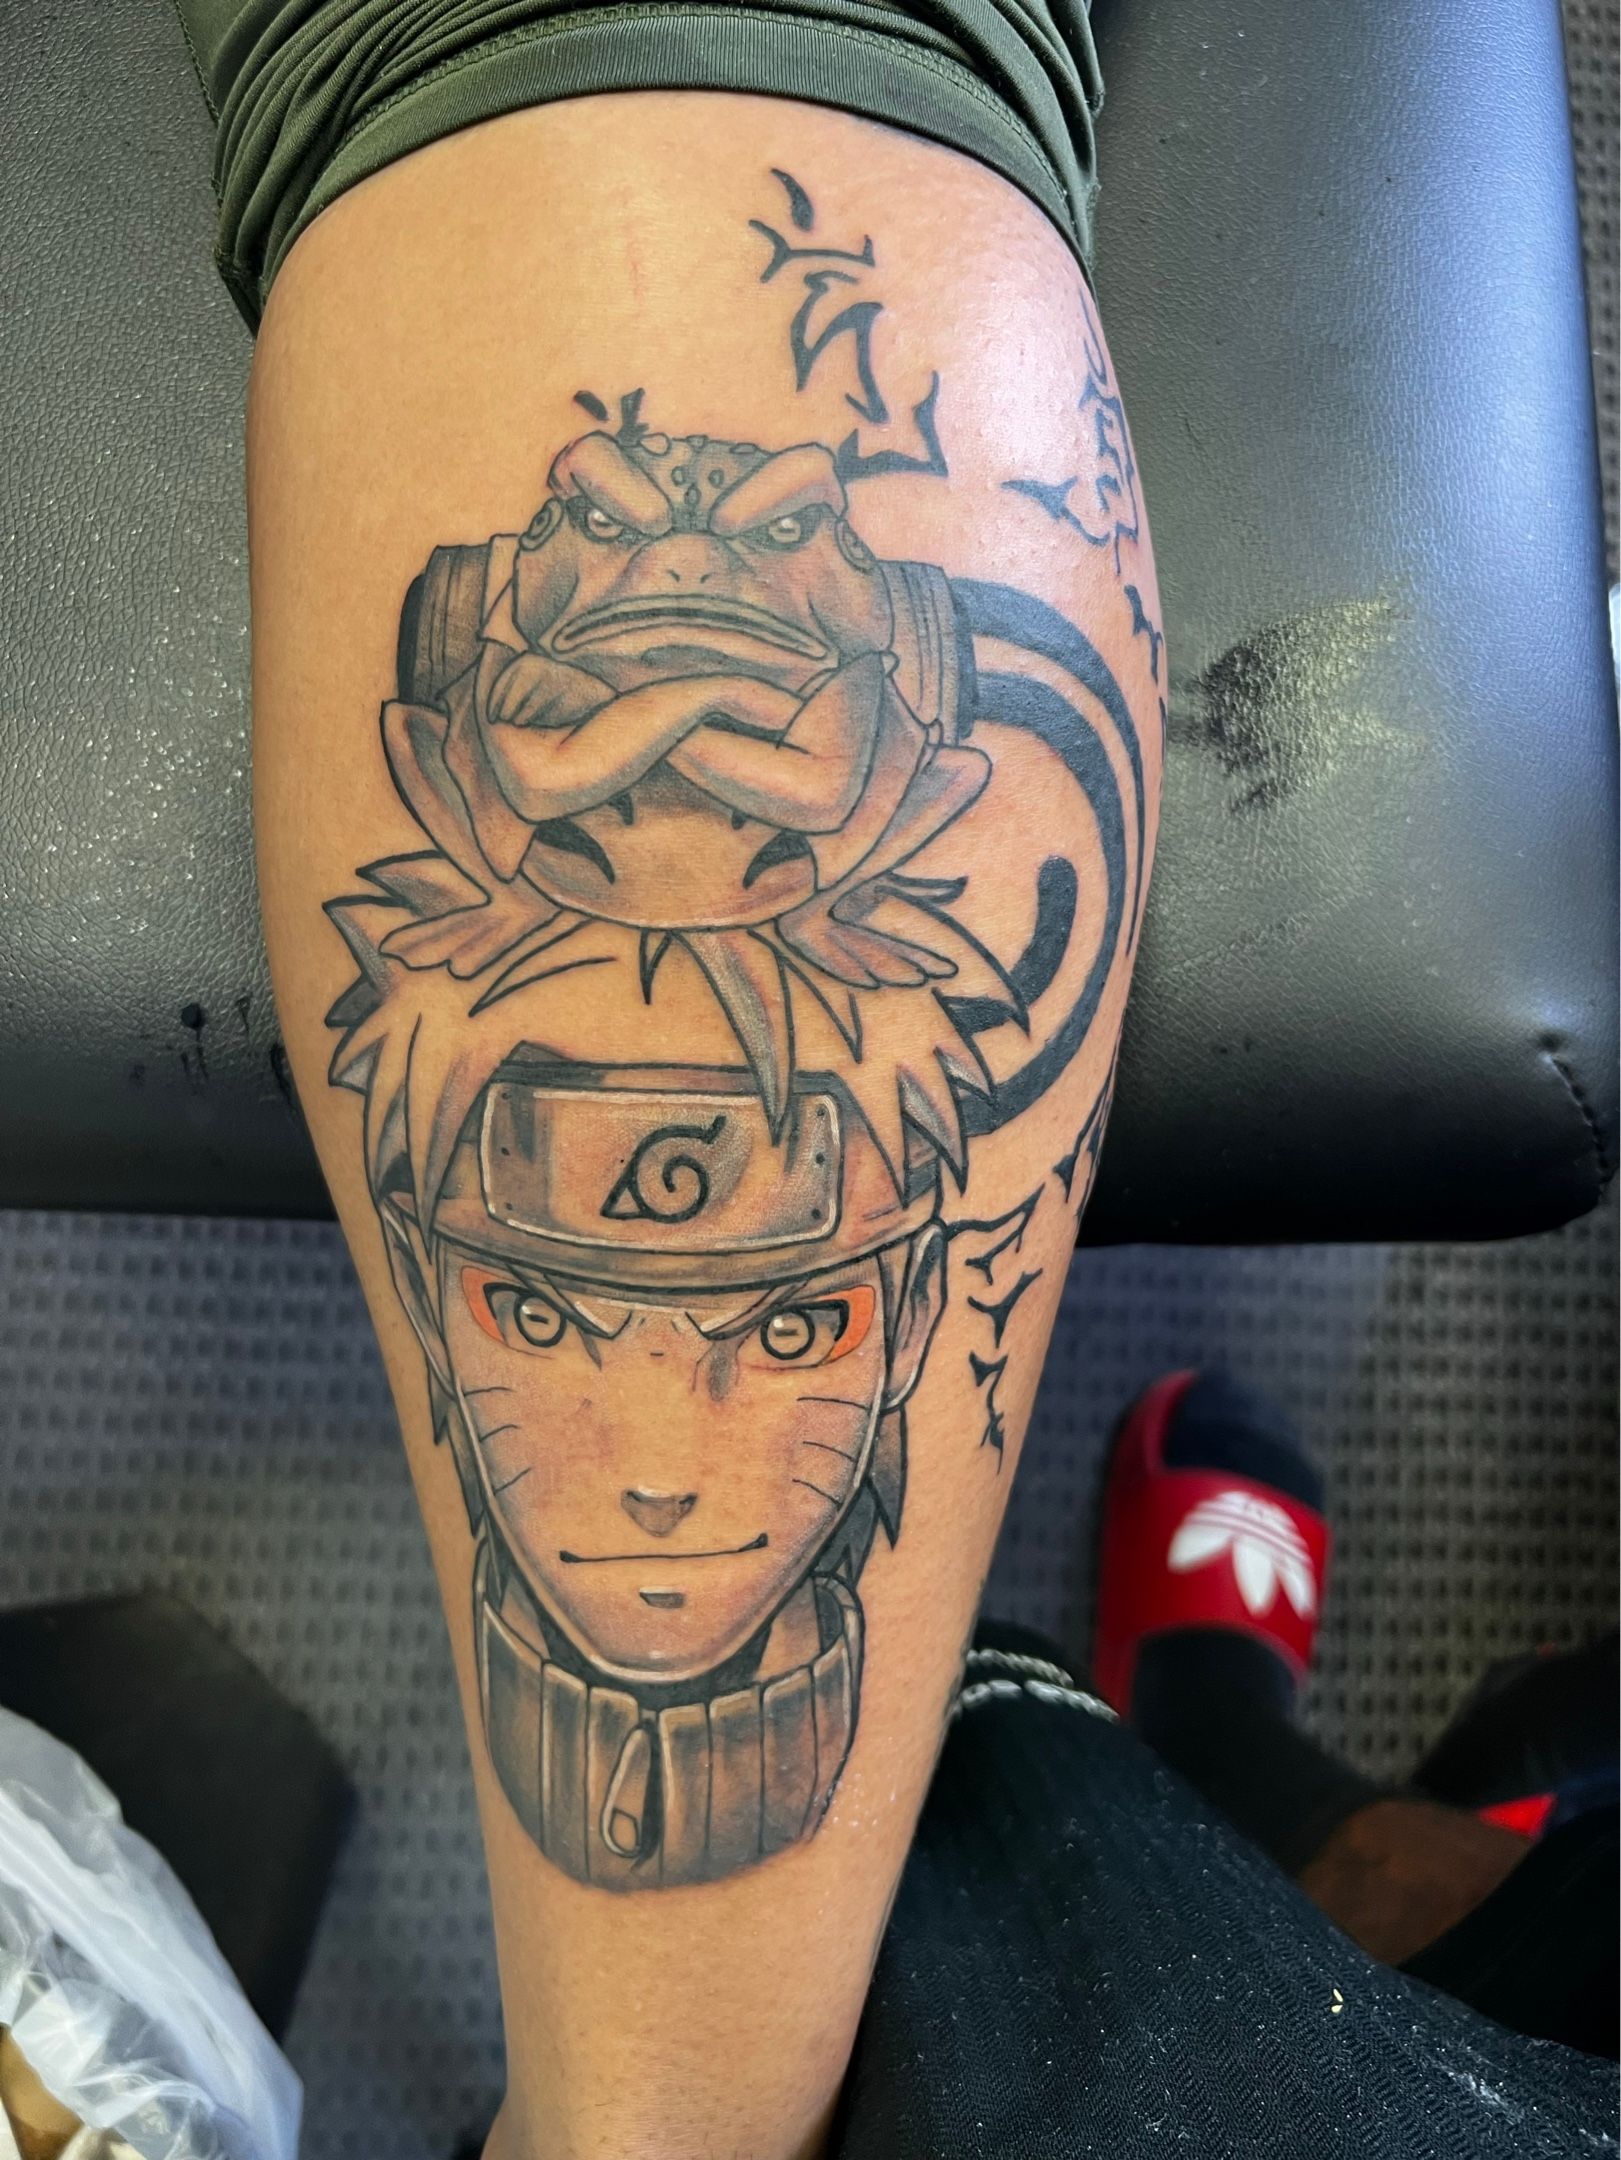 Naruto by Dylan @ Holdfast Tattoo in Perth Western Australia. So happy with  how it turned out! | Naruto tattoo, Anime tattoos, Tattoos